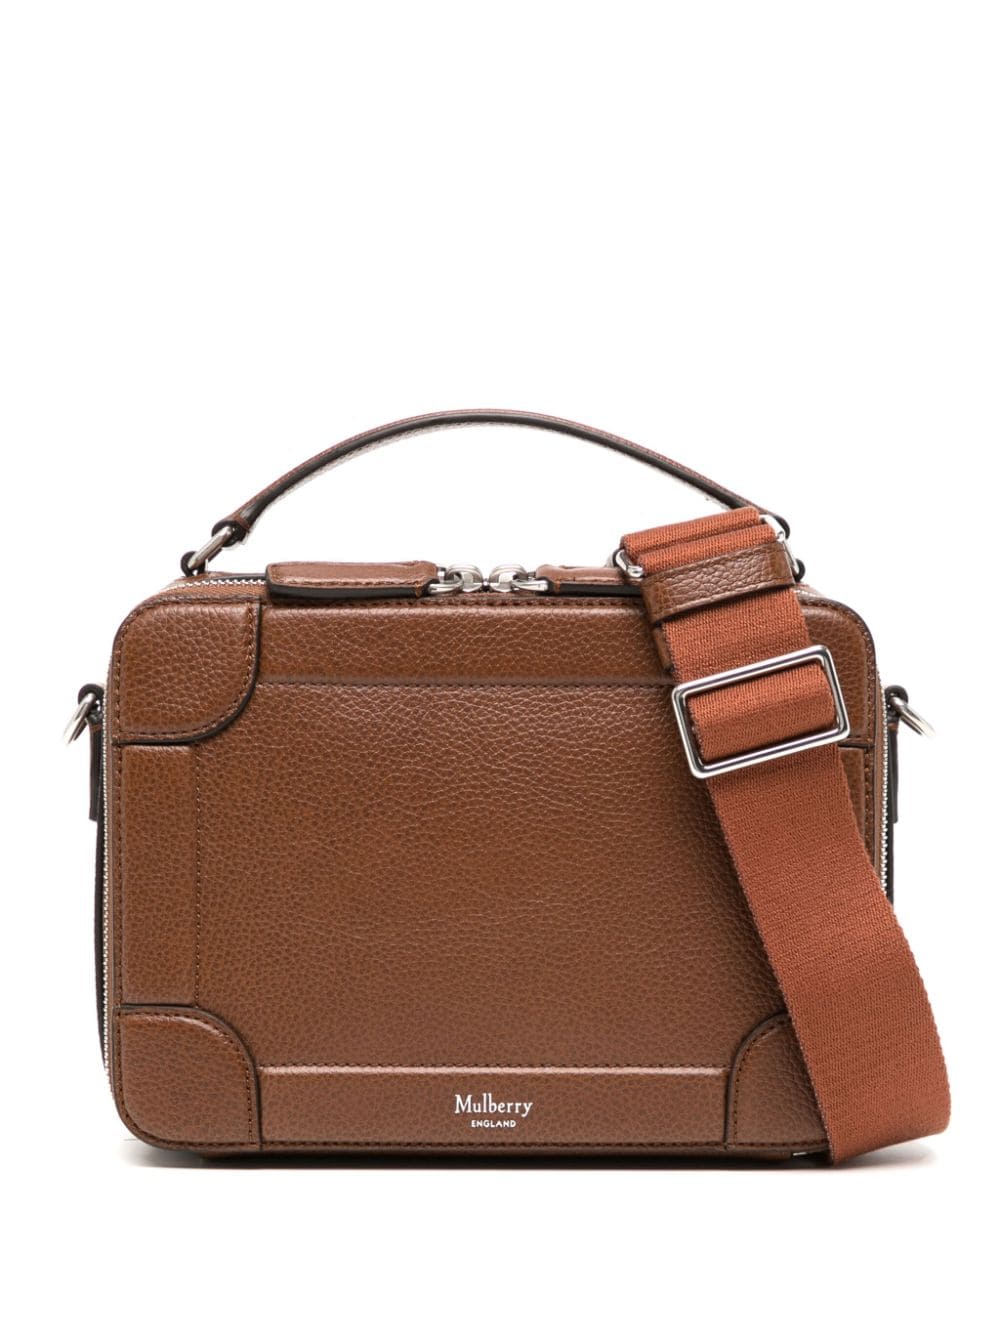 Mulberry Belgrave leather messenger bag - Brown von Mulberry